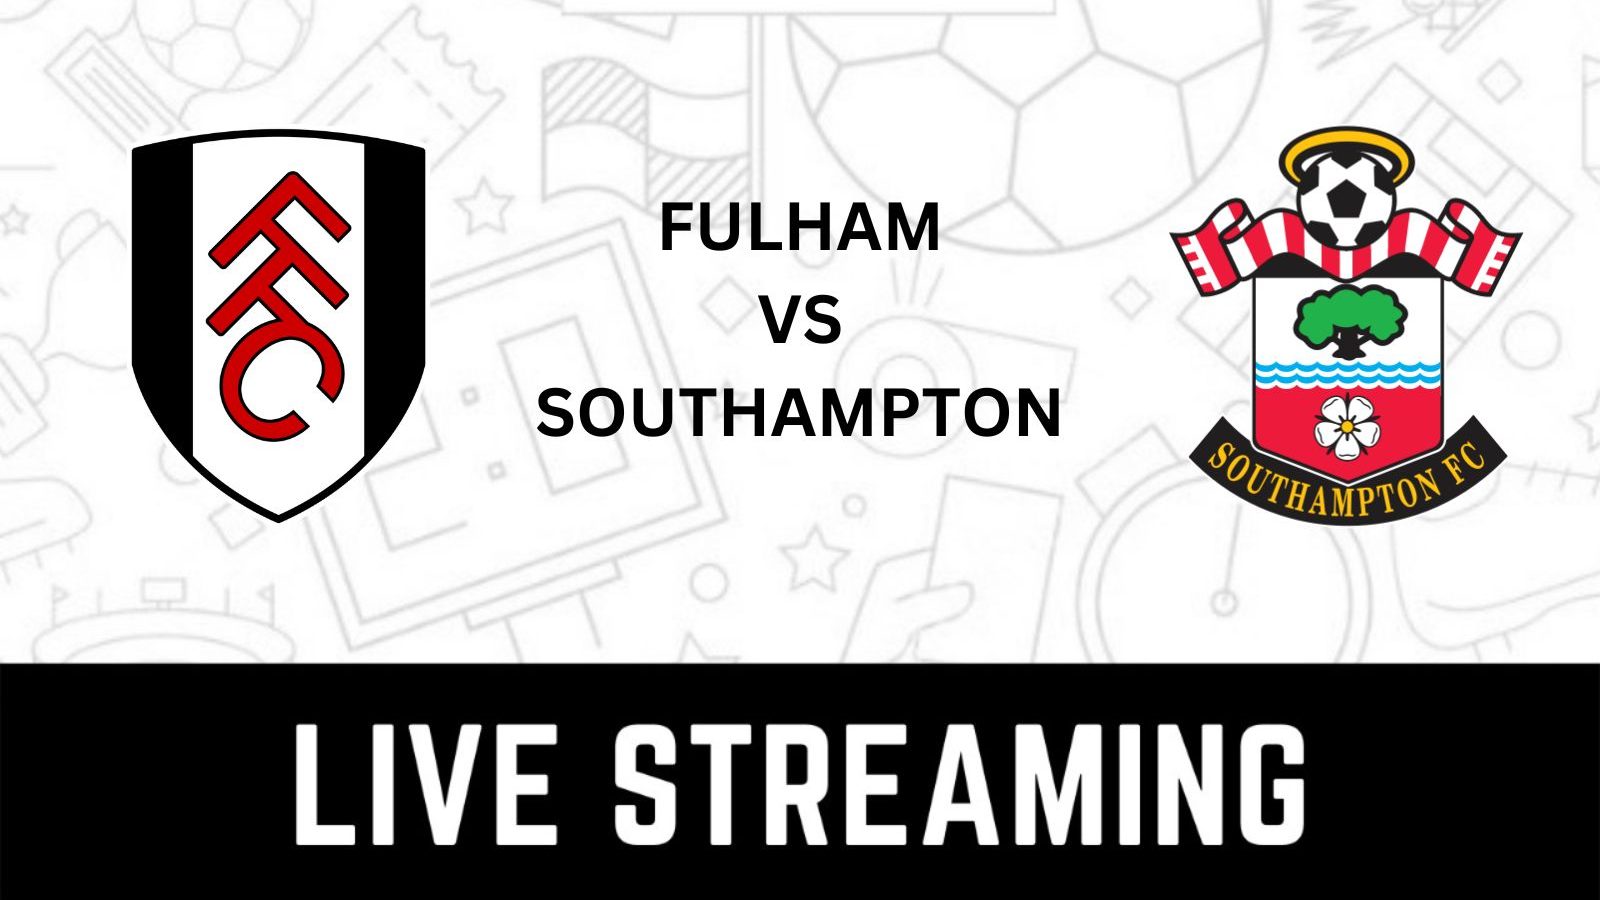 Fulham vs Southampton Premier League Live Streaming When and Where to Watch Fulham vs Southampton LIVE?